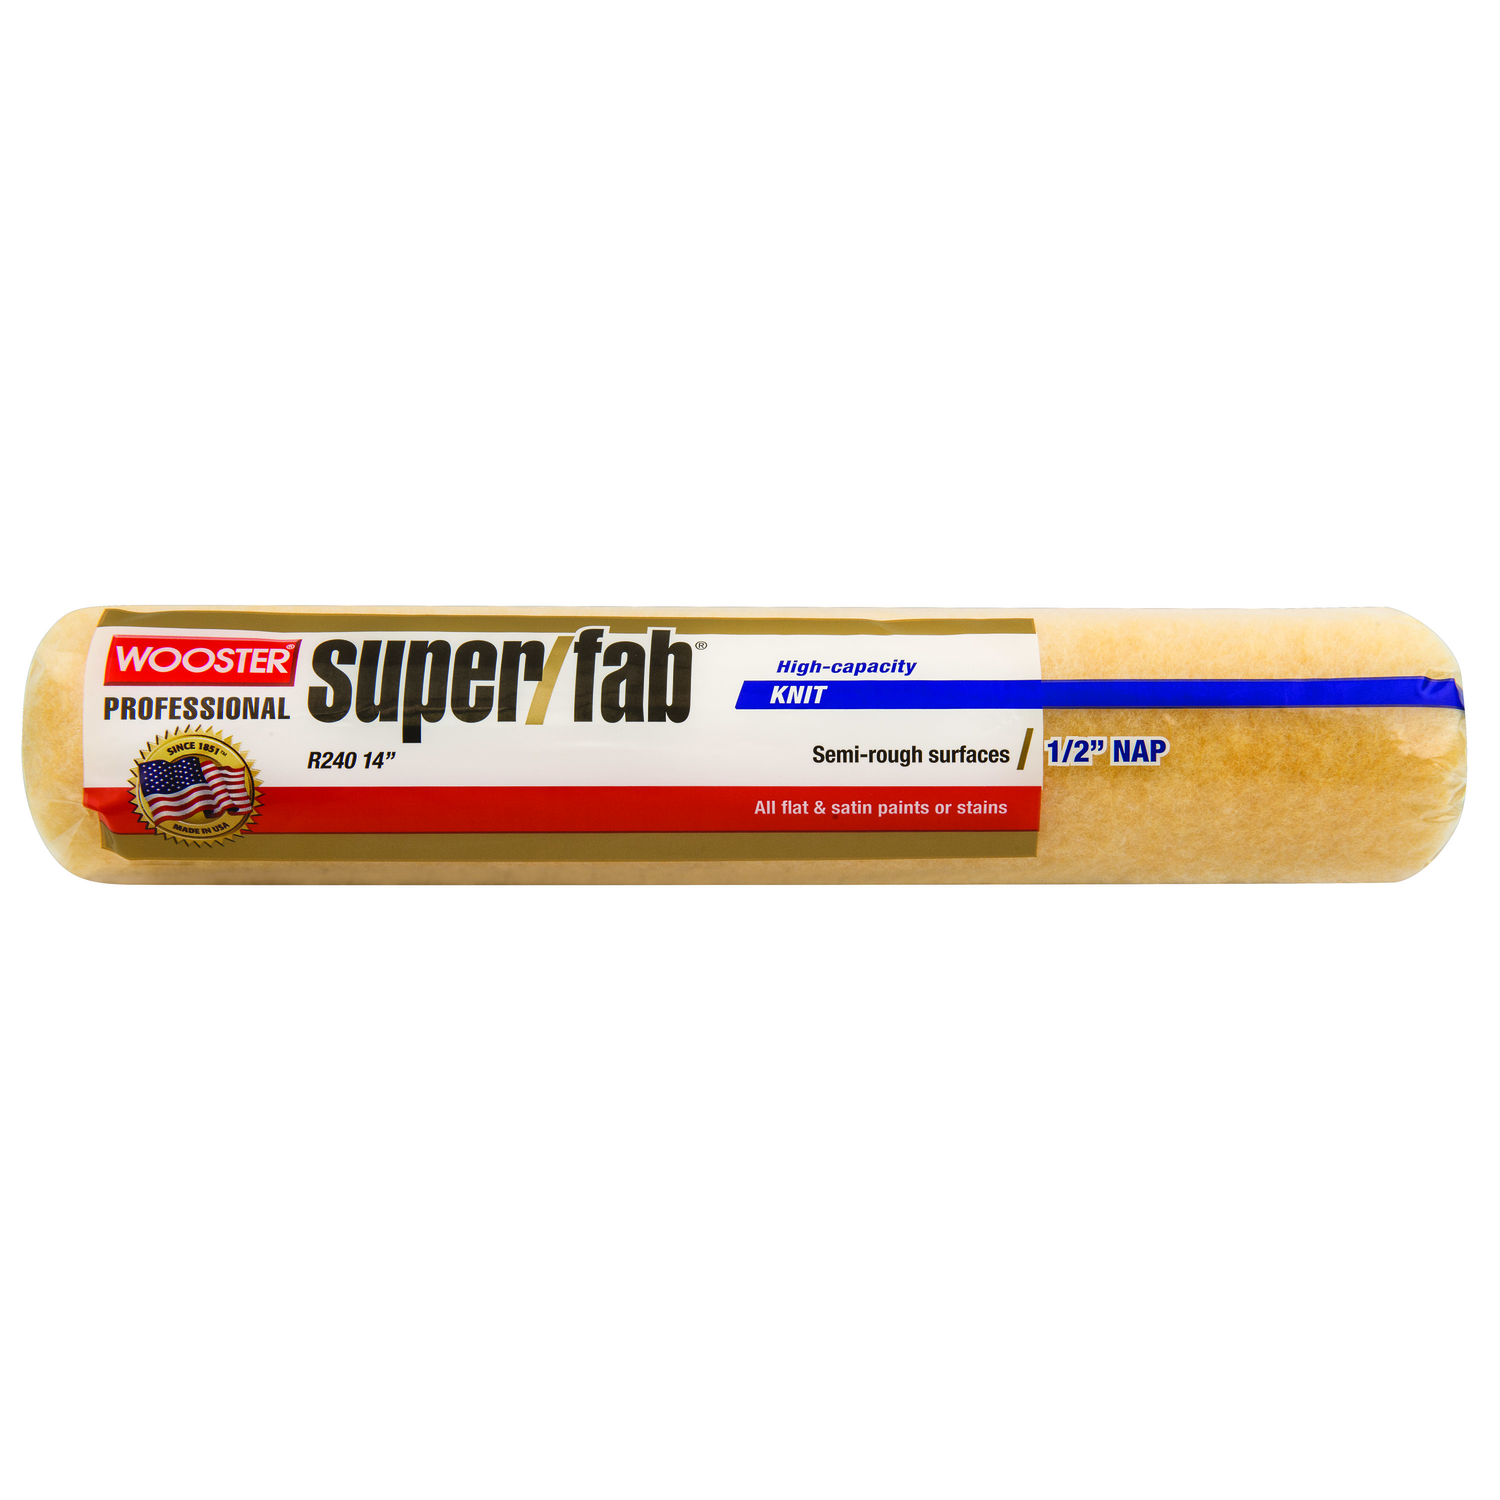 Photos - Putty Knife / Painting Tool Wooster Super/Fab Knit 14 in. W X 1/2 in. Regular Paint Roller Cover 1 pk